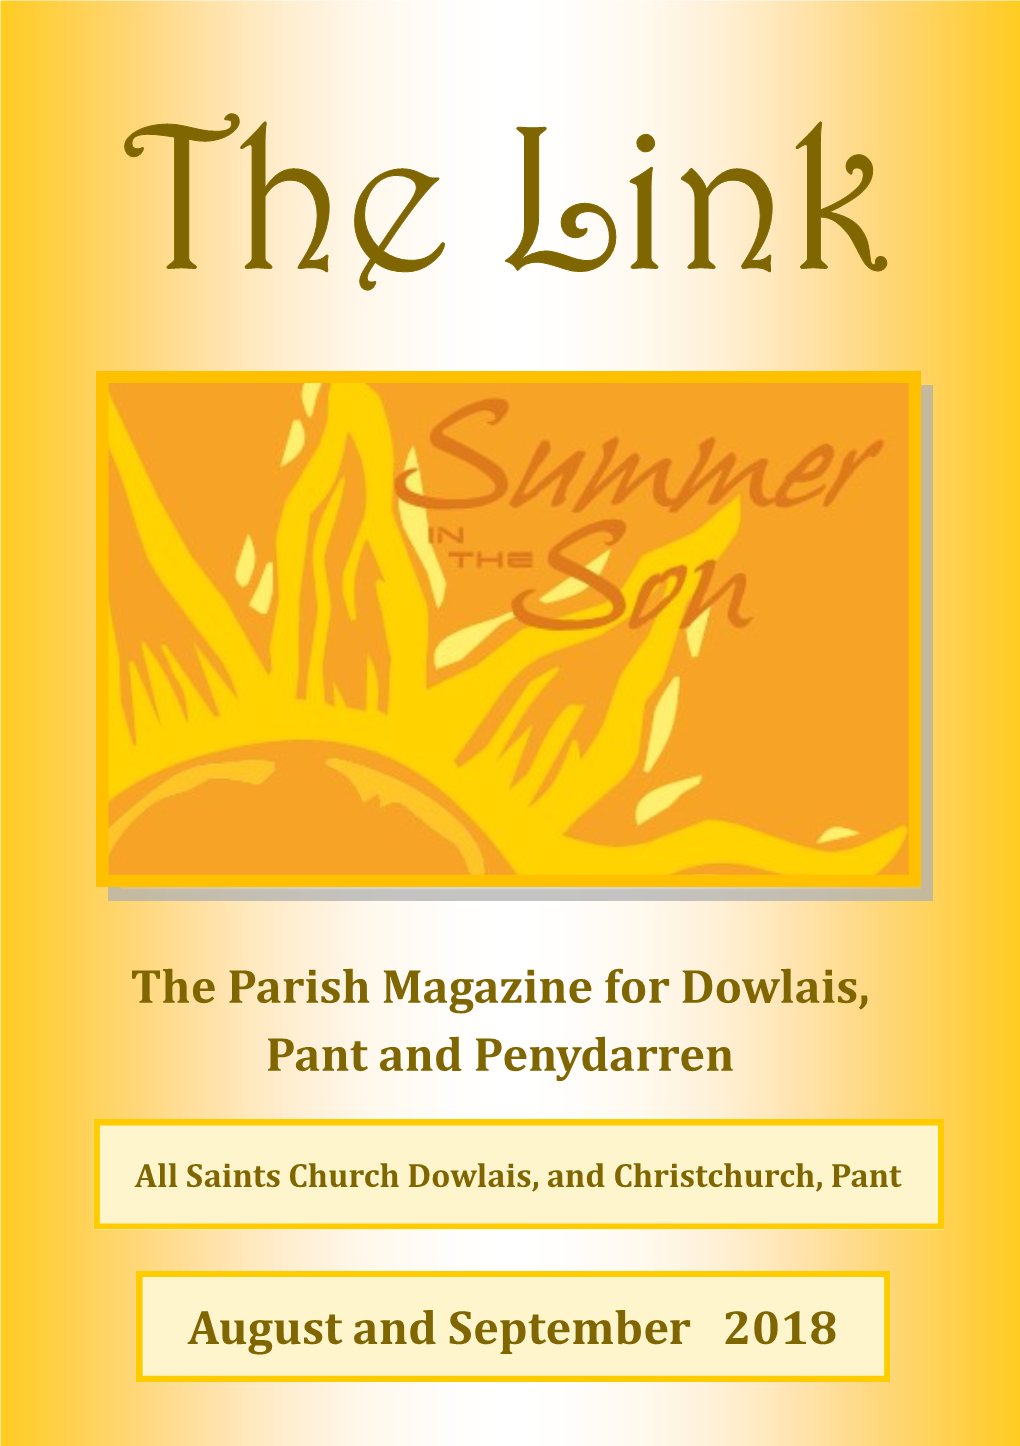 August and September 2018 the Parish Magazine for Dowlais, Pant